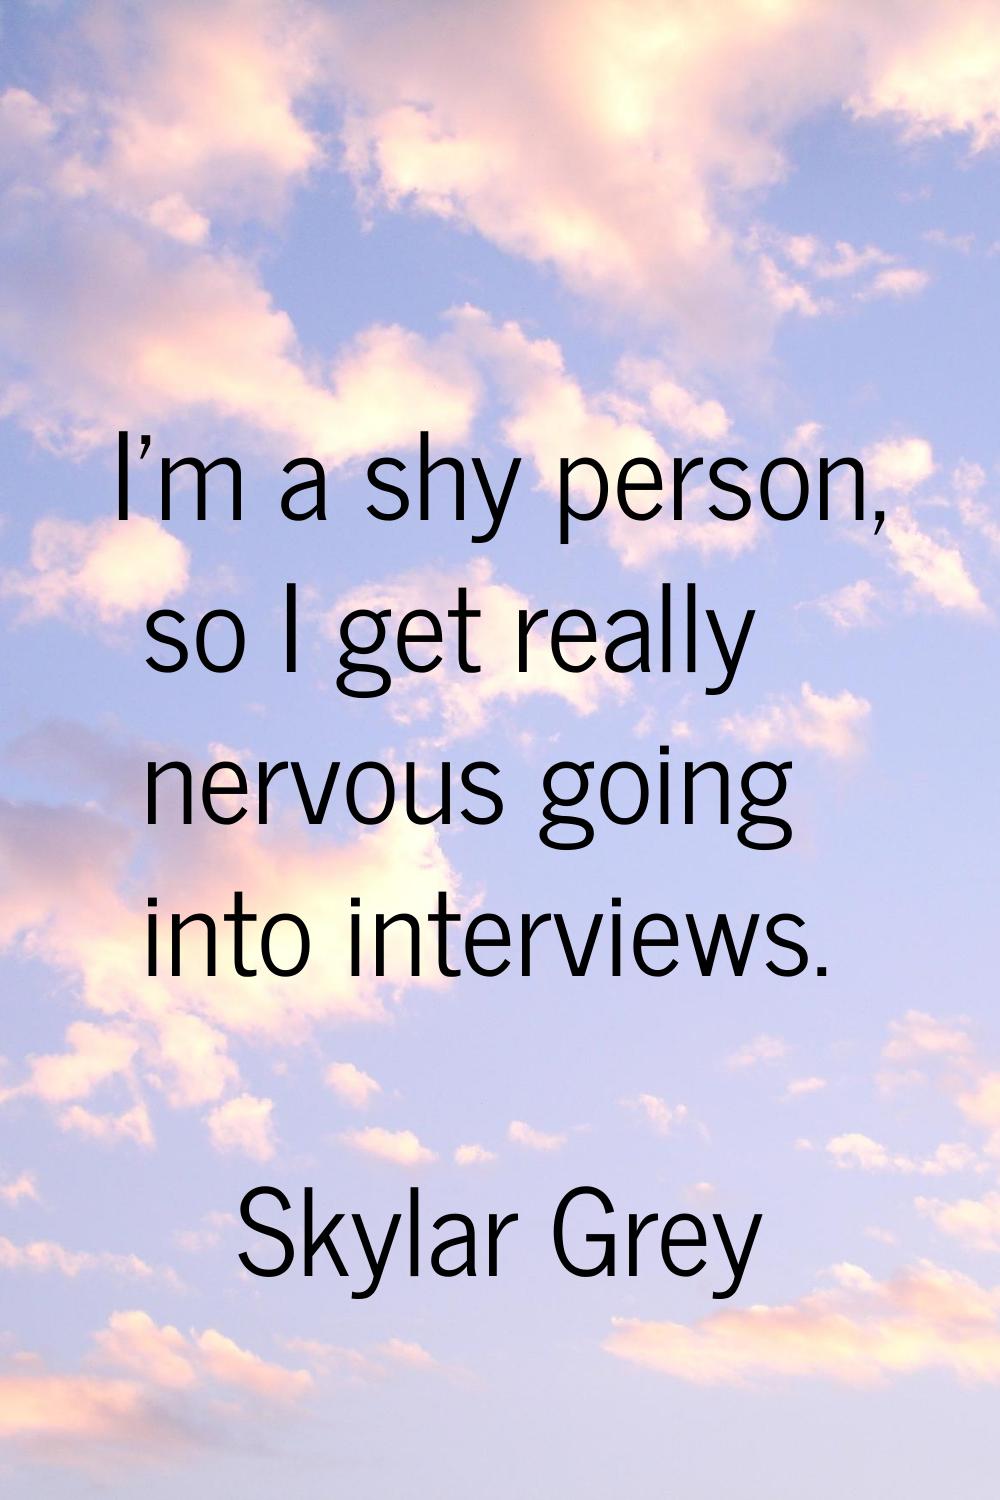 I'm a shy person, so I get really nervous going into interviews.